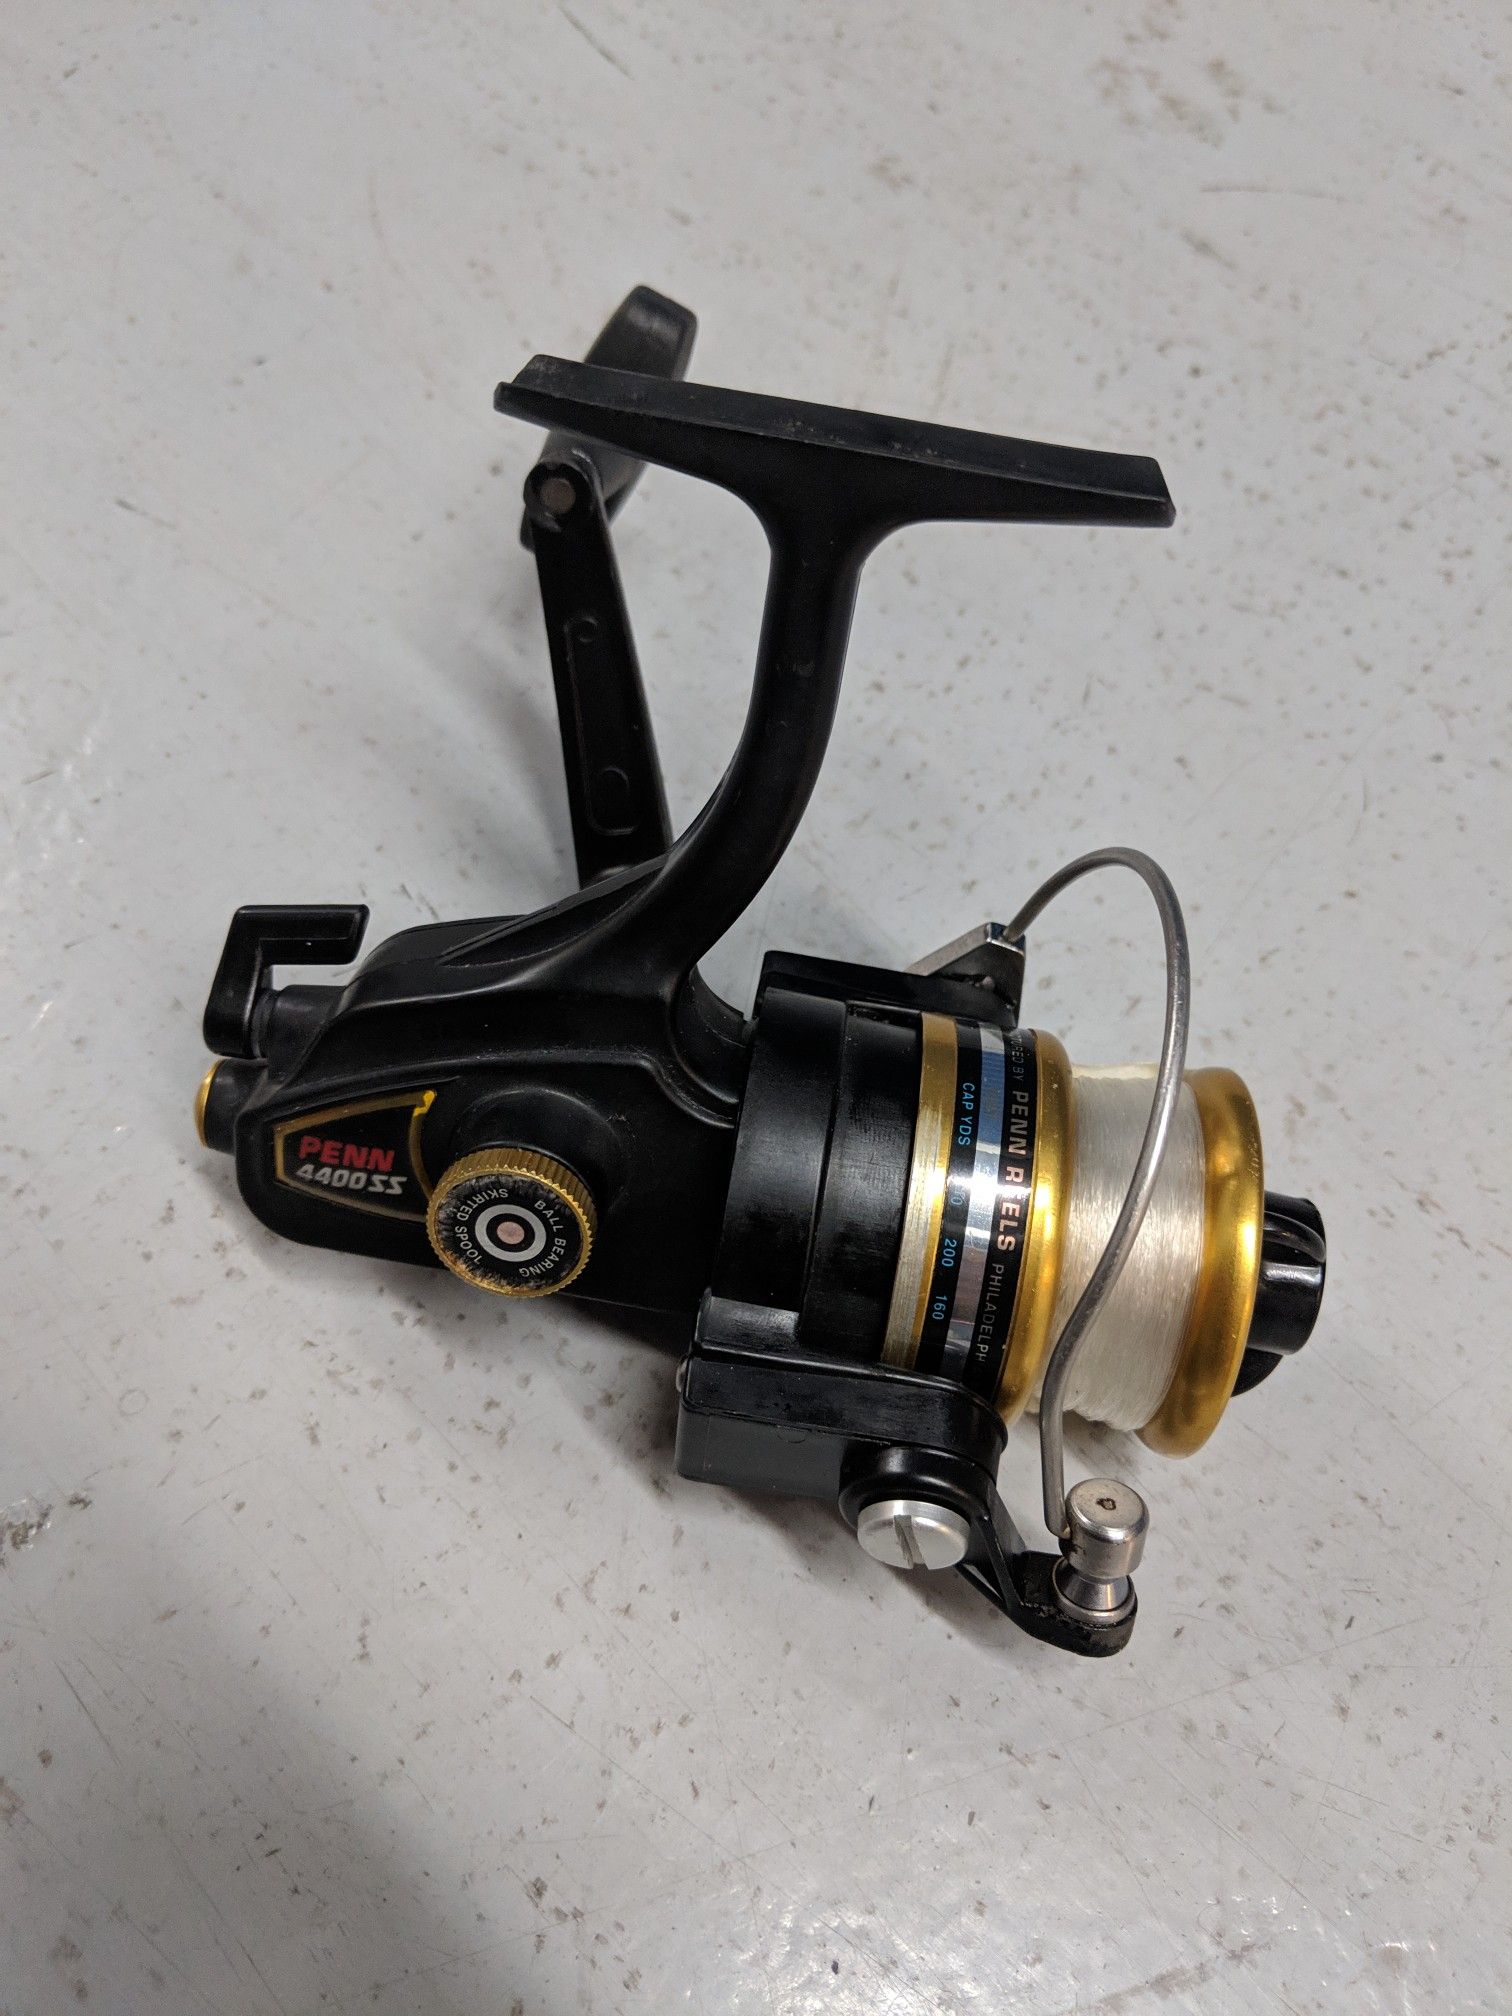 Penn 4400 SS Spinning Reel. Good Condition. Ready for fishing.